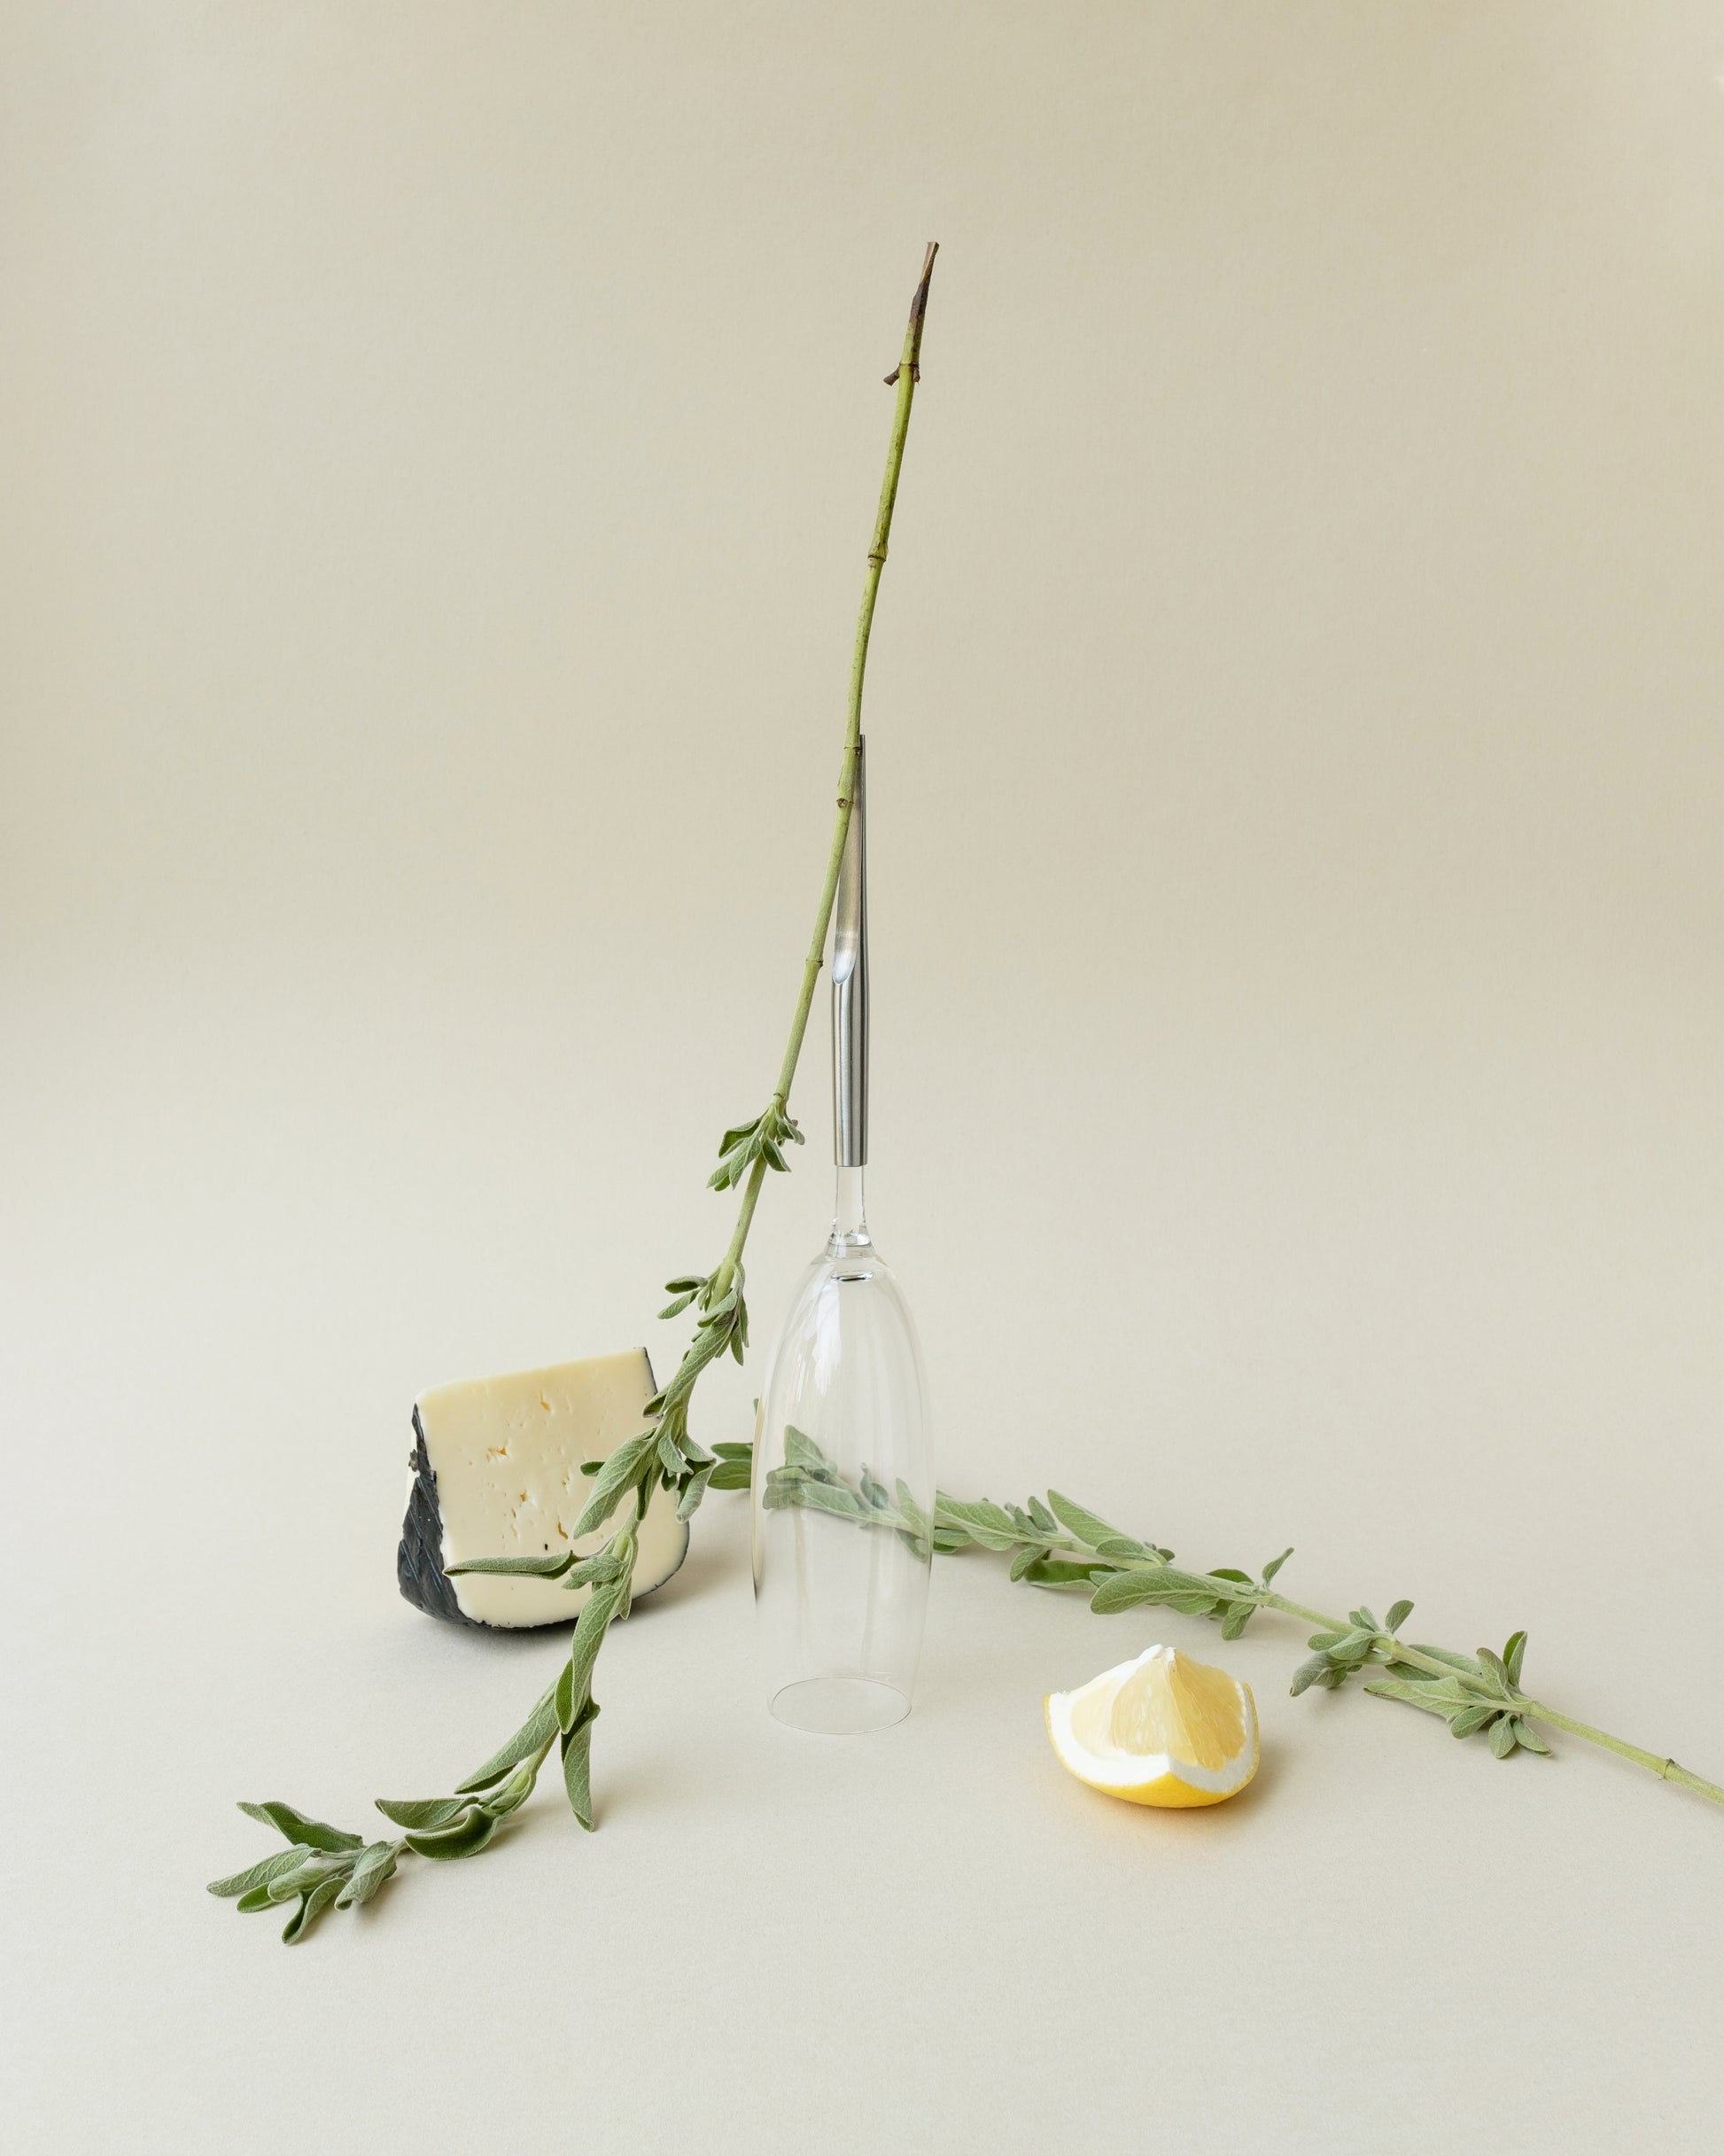 Crystal Champagne Glass with metal Pin standing upside-down, with cheese and cut lemon